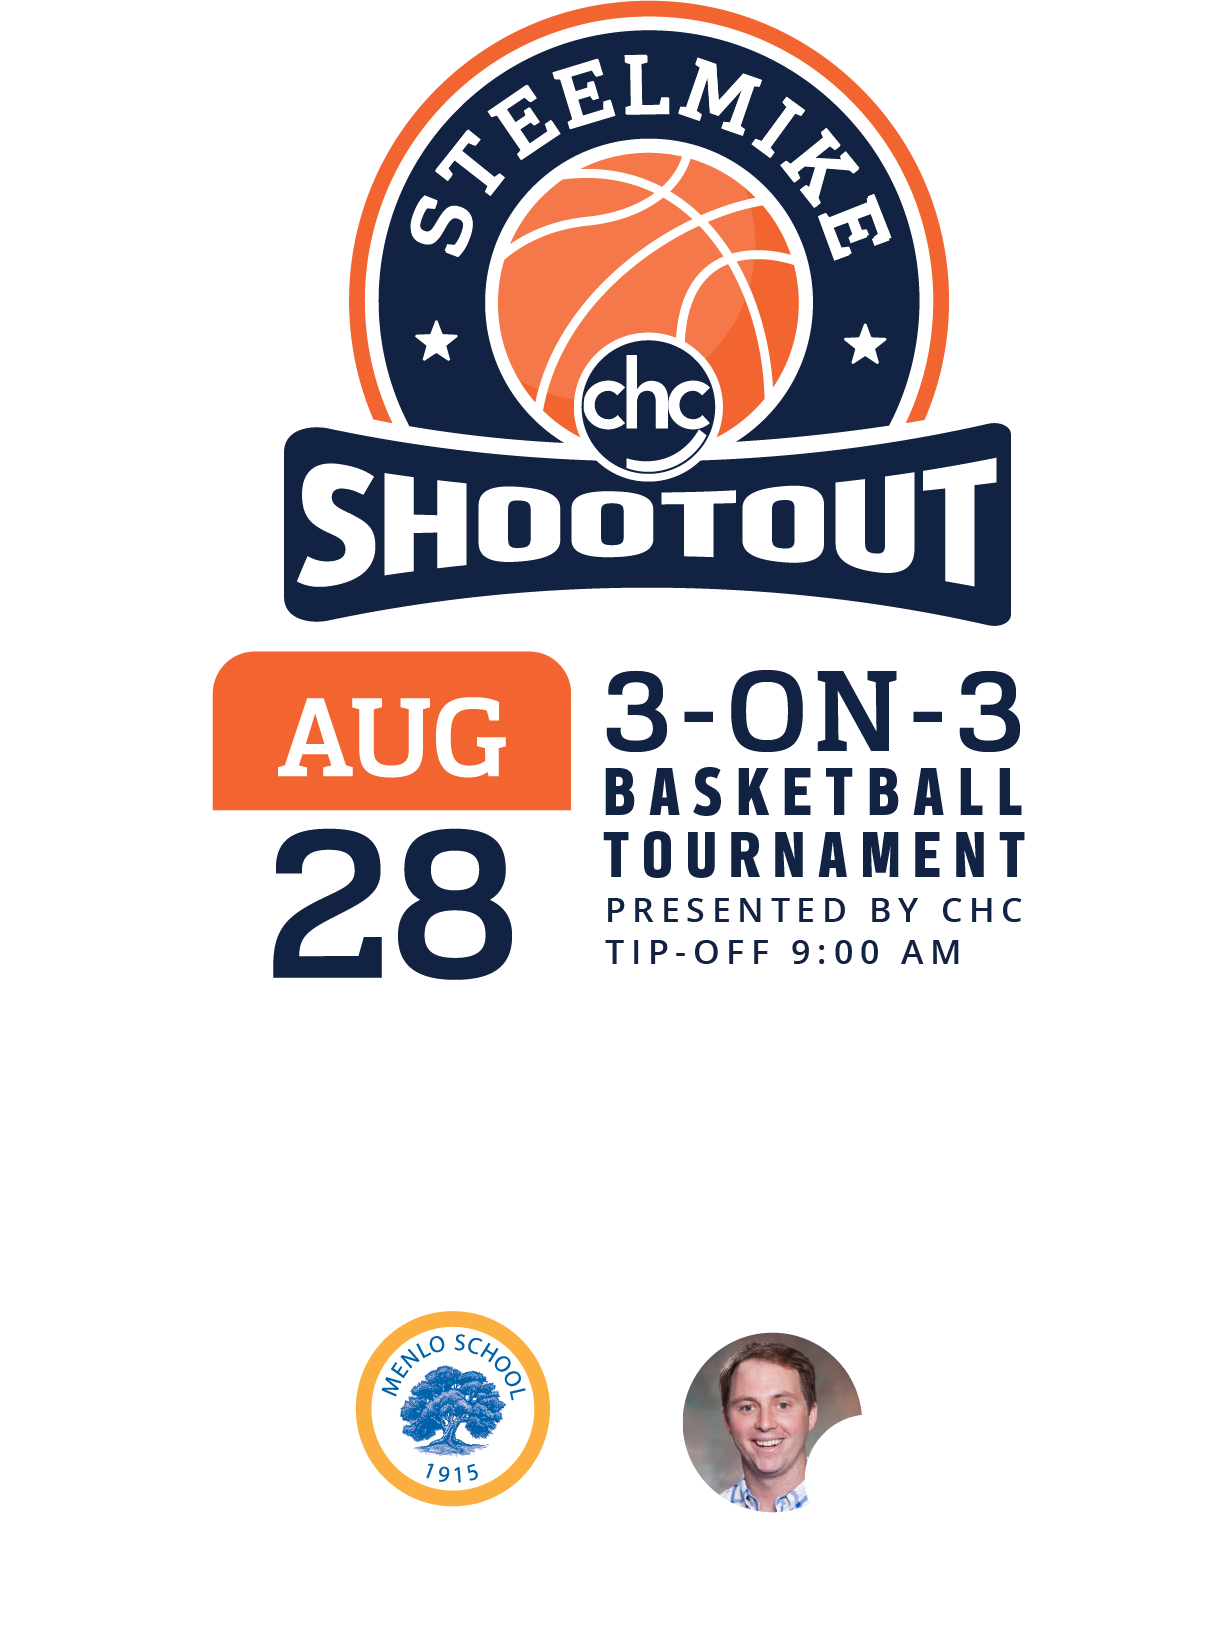 CHC SteelMike Shootout. Registration Open Now! Sponsor Host: Menlo School. Aug 28. 3-on-3 Basketball Tournament Presented by CHC. Tip-Off: 9:00AM. Benefitting Michael Harris Fund at CHC.